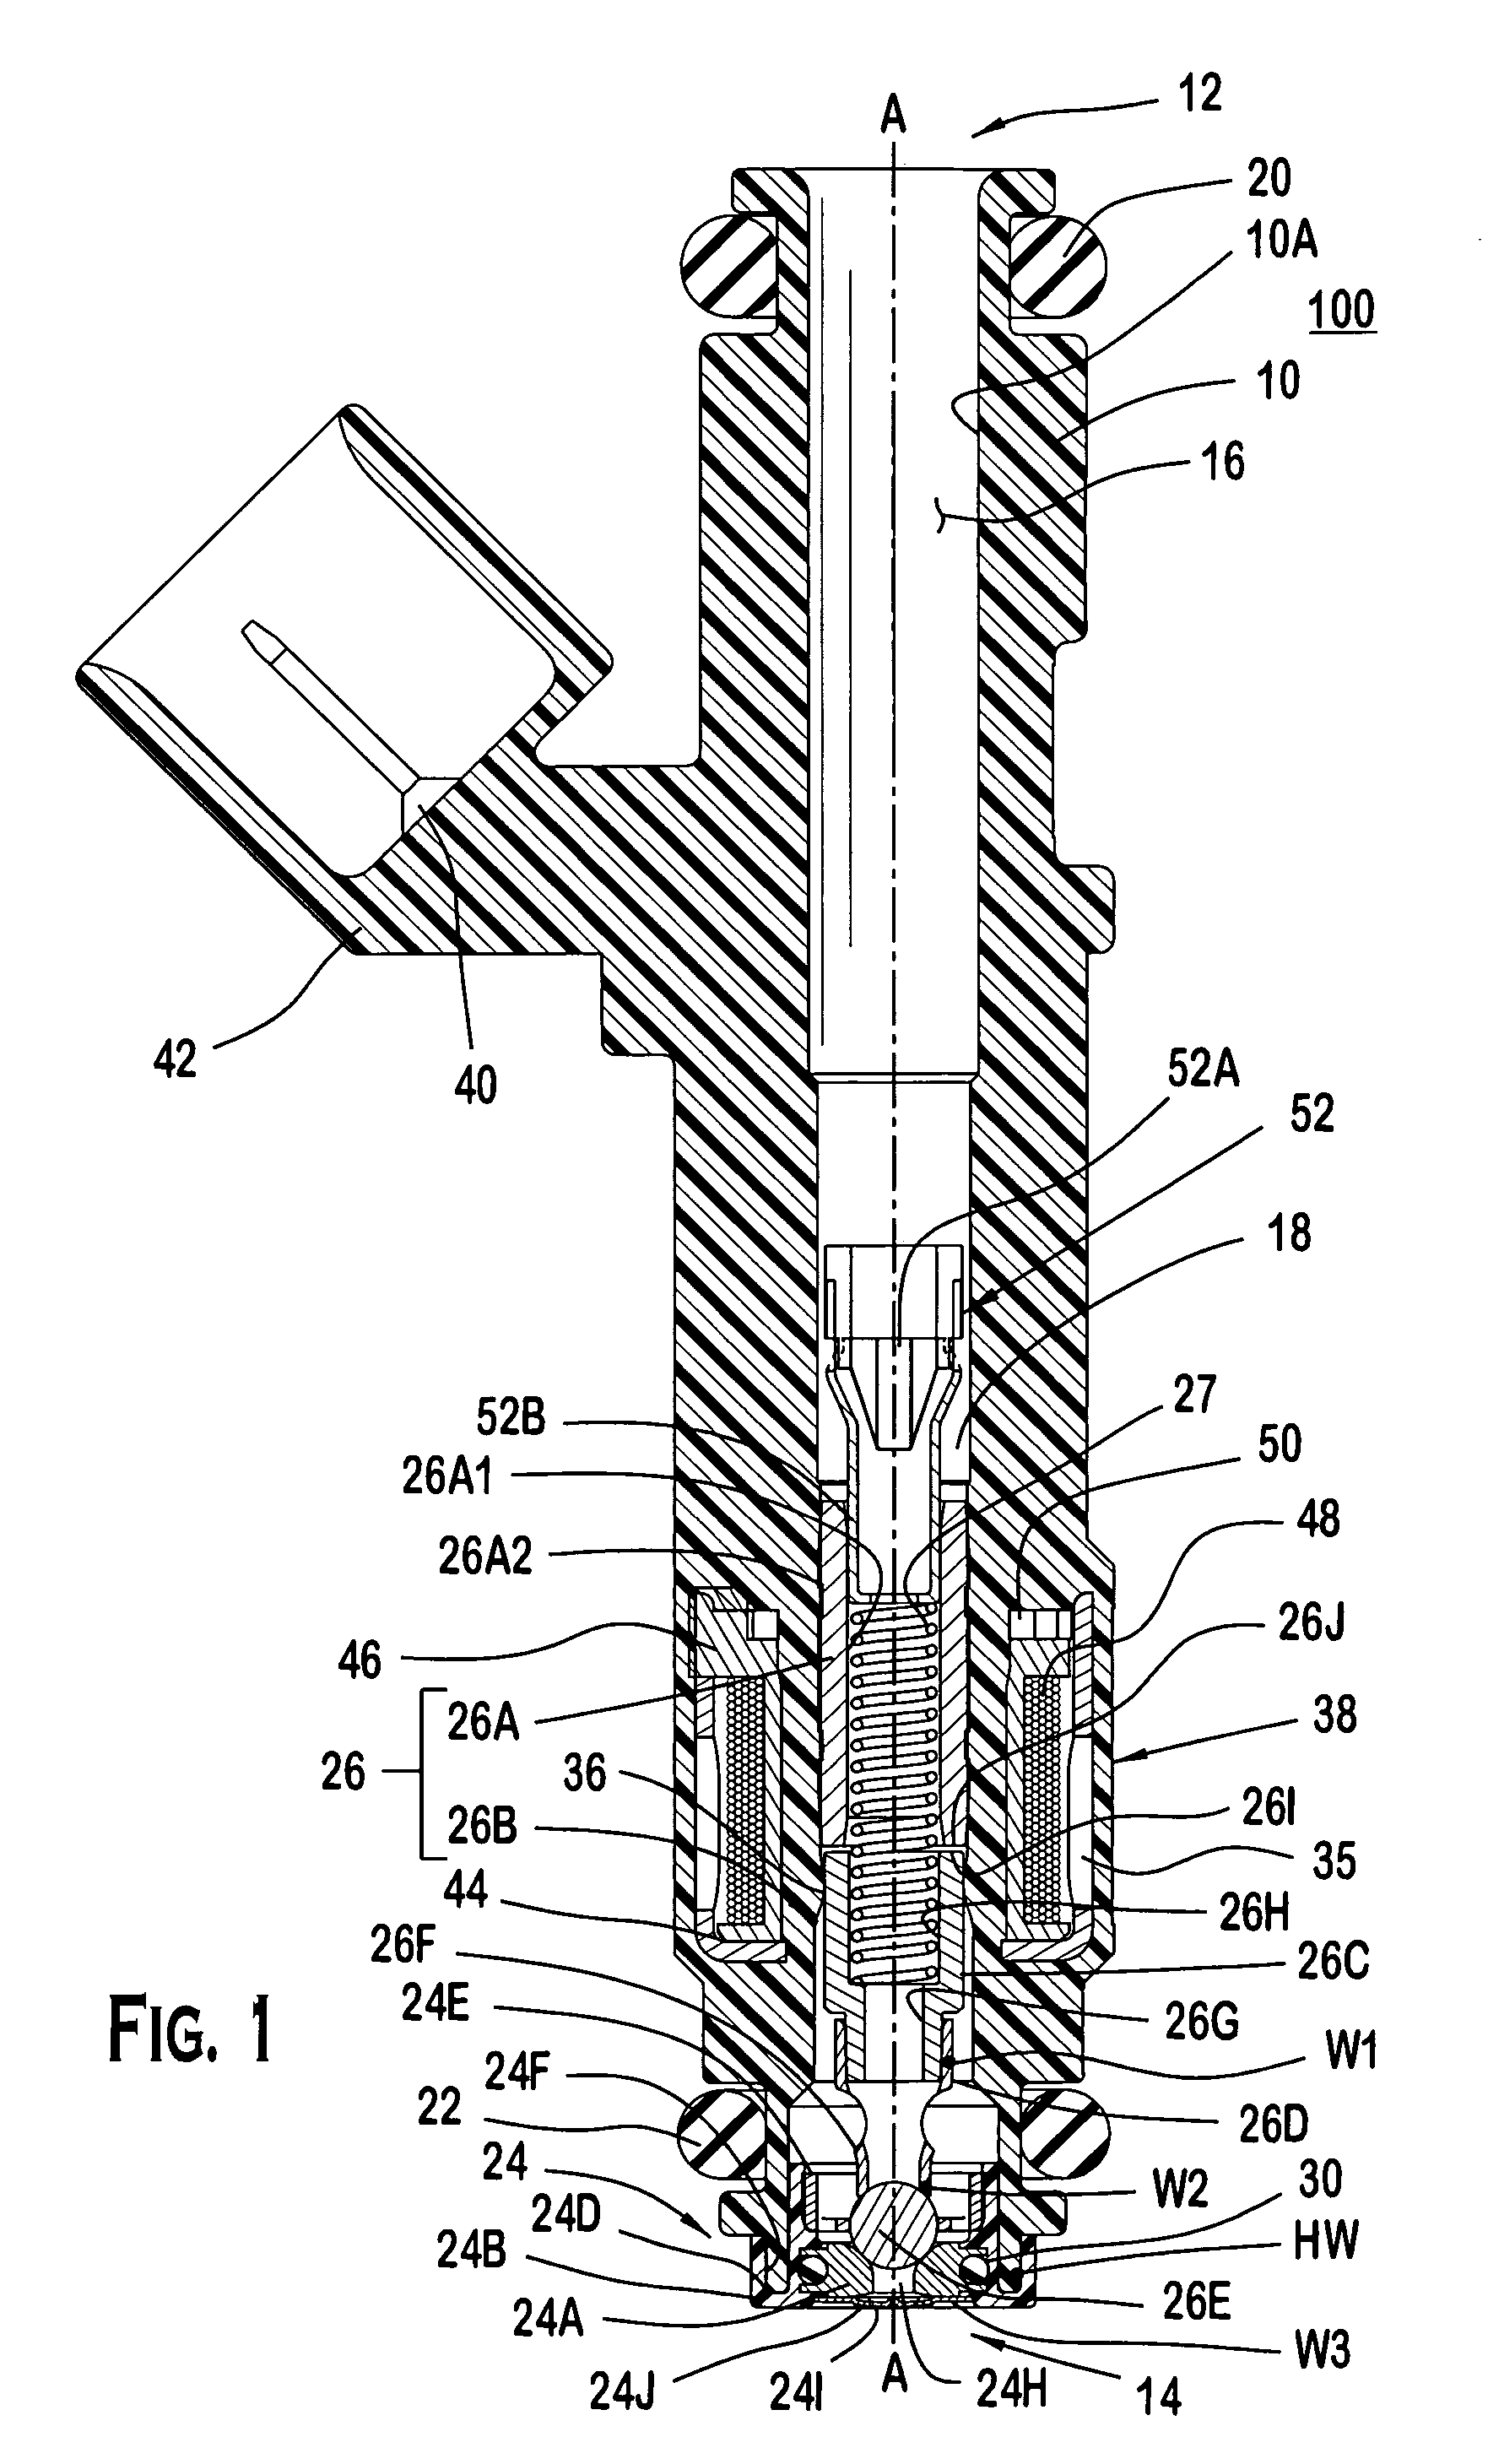 Fuel injector with a metering assembly having a seat secured to polymeric support member that is secured to a polymeric housing with a guide member and a seat disposed in the polymeric support member